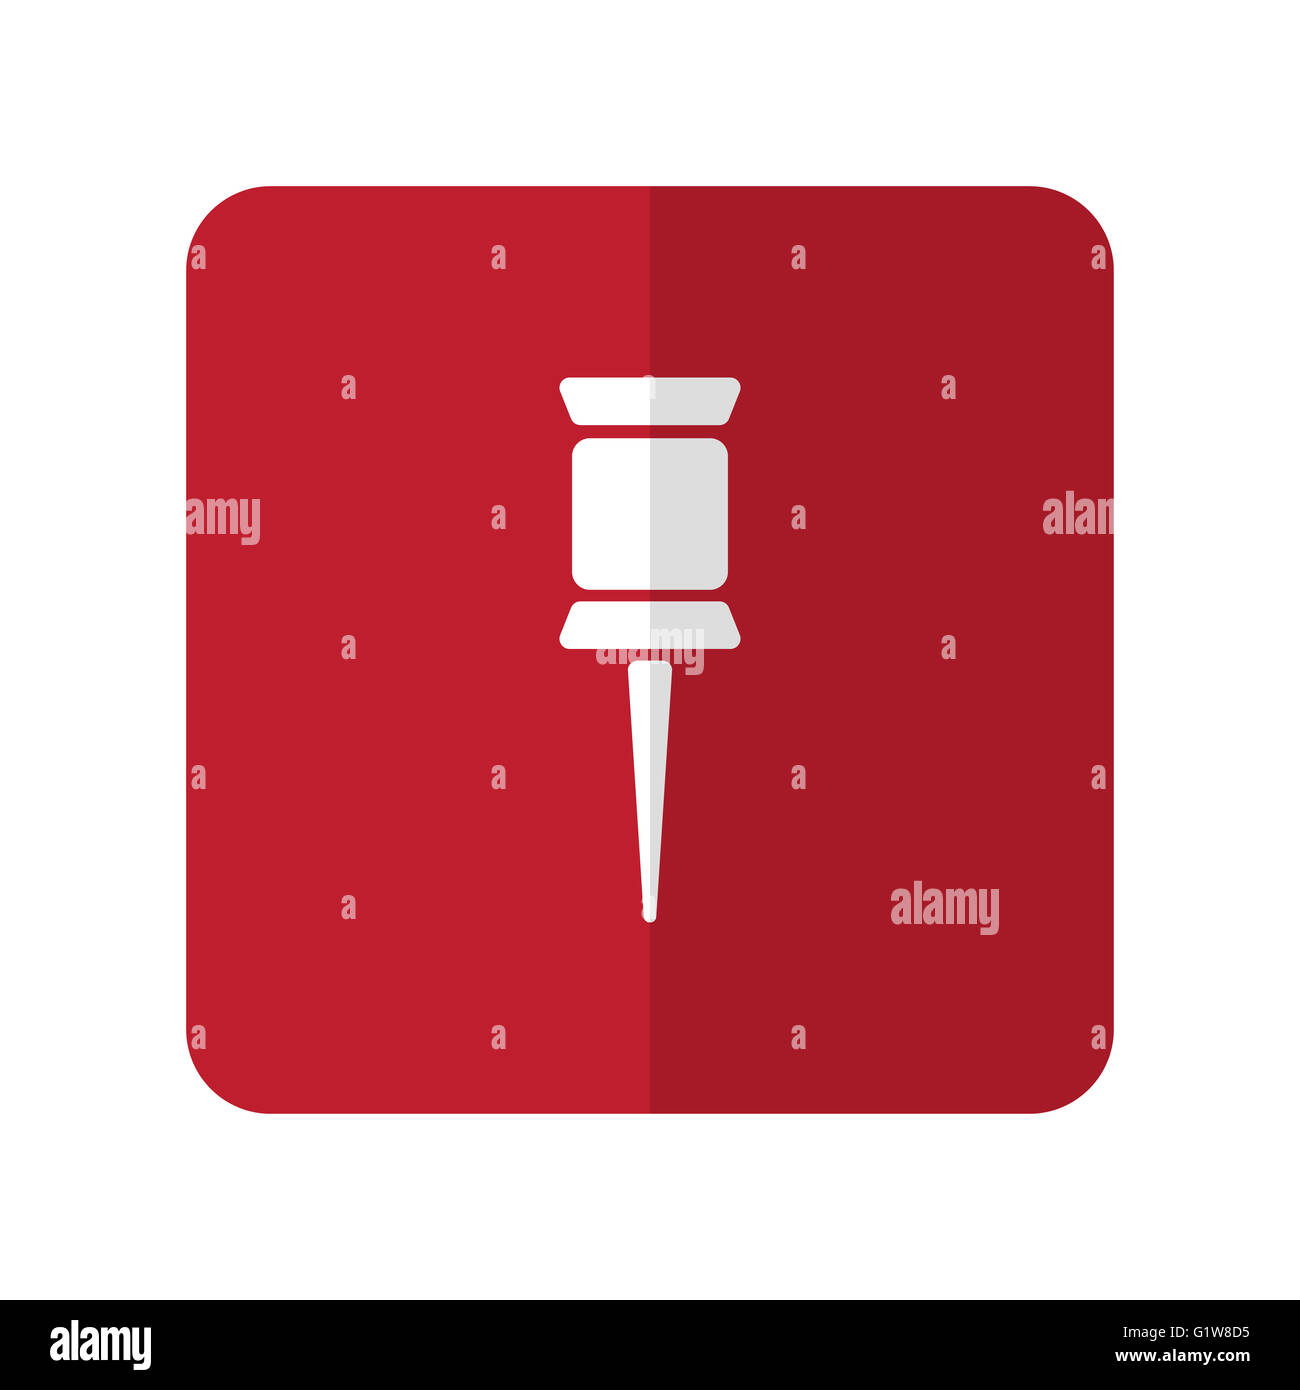 White Pushpin flat icon on red rounded square on white Stock Photo